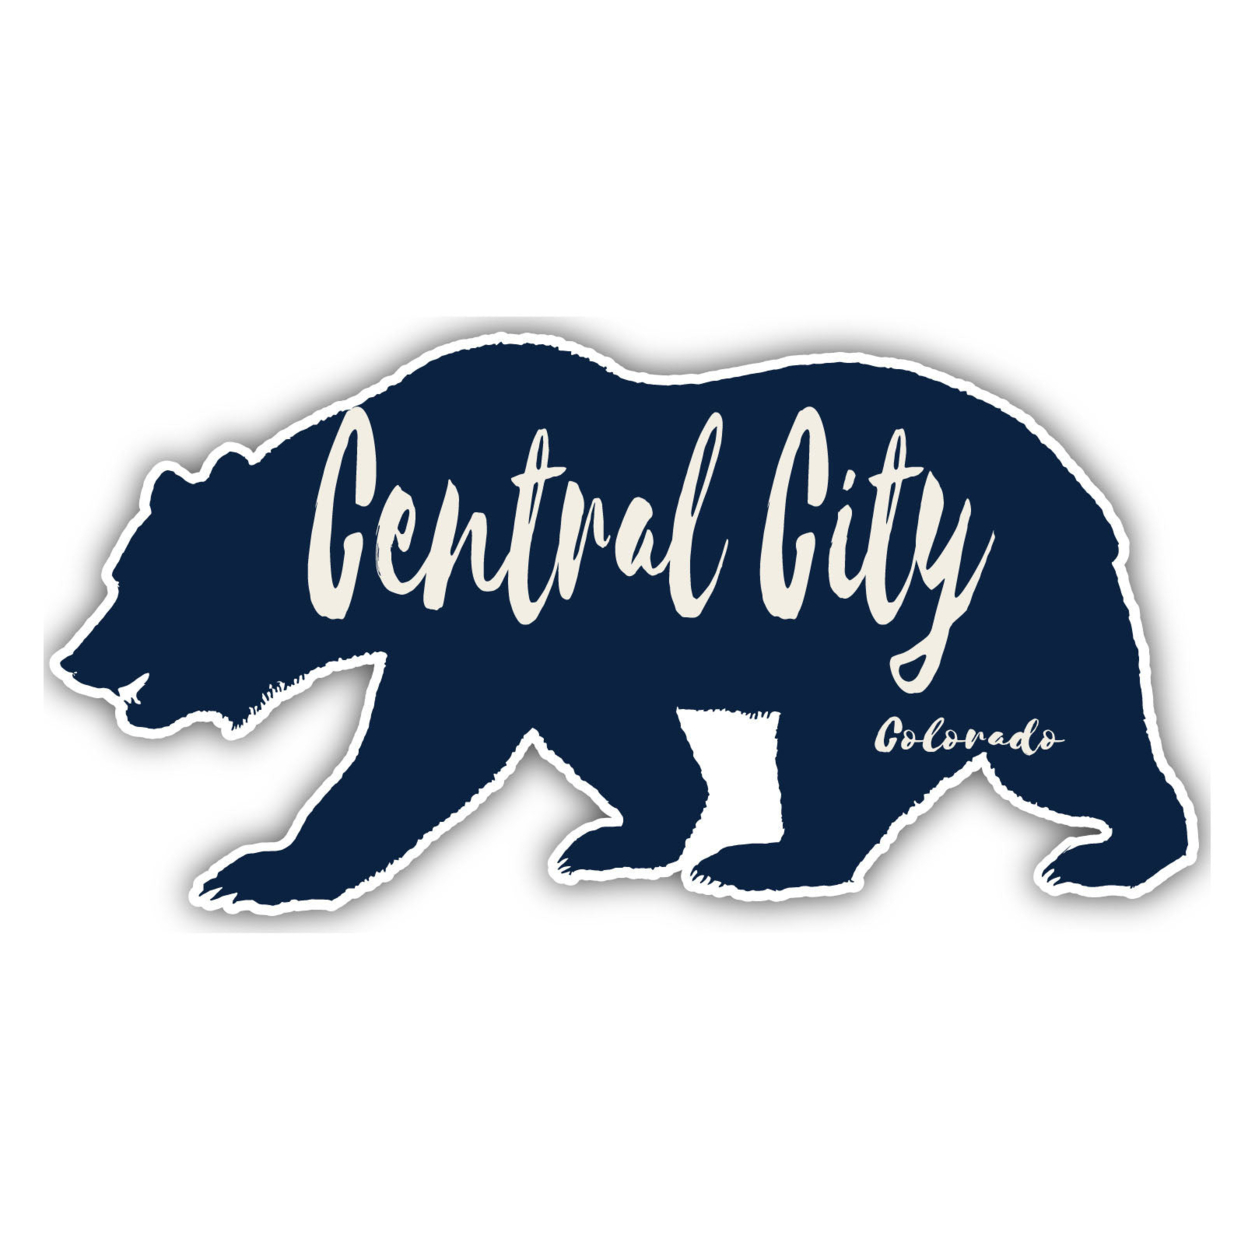 Central City Colorado Souvenir Decorative Stickers (Choose Theme And Size) - 4-Pack, 2-Inch, Camp Life